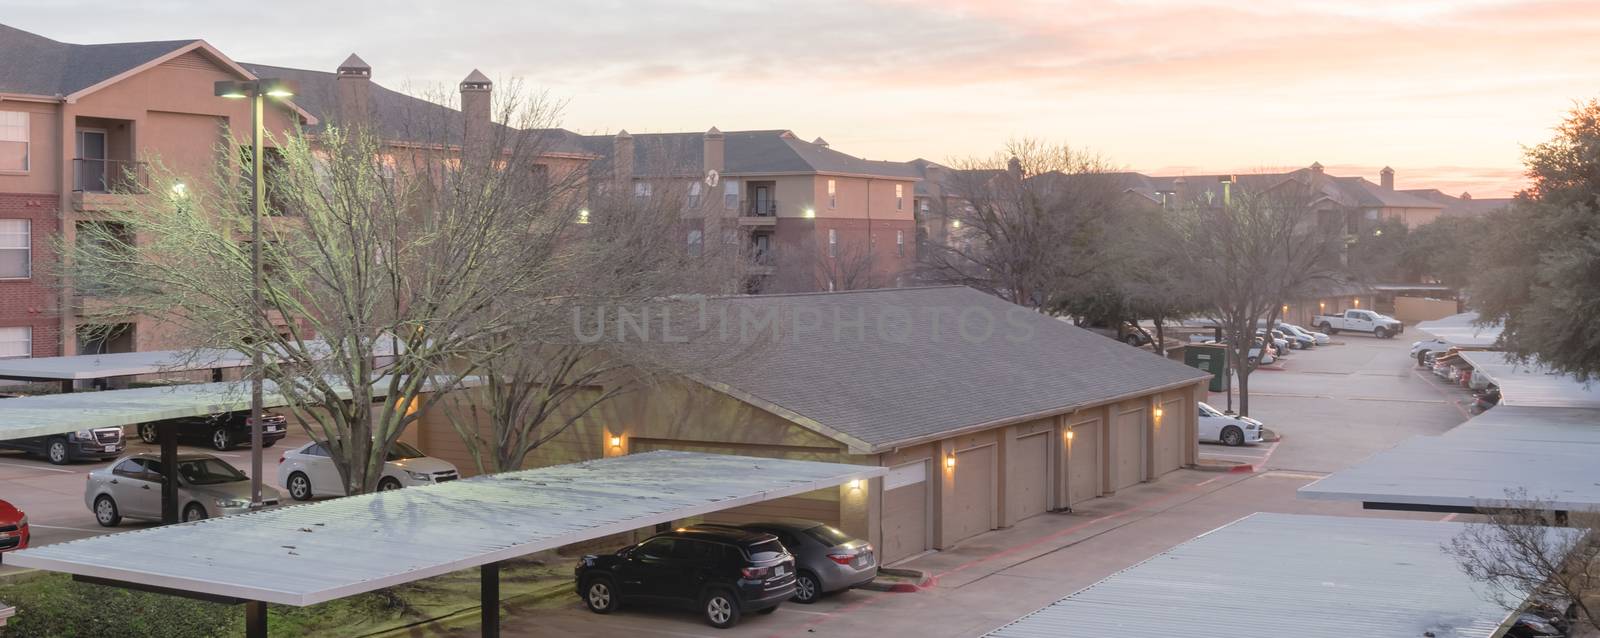 Panorama view typical aerial of apartment complex with detached garage and covered parking lots in Texas, America